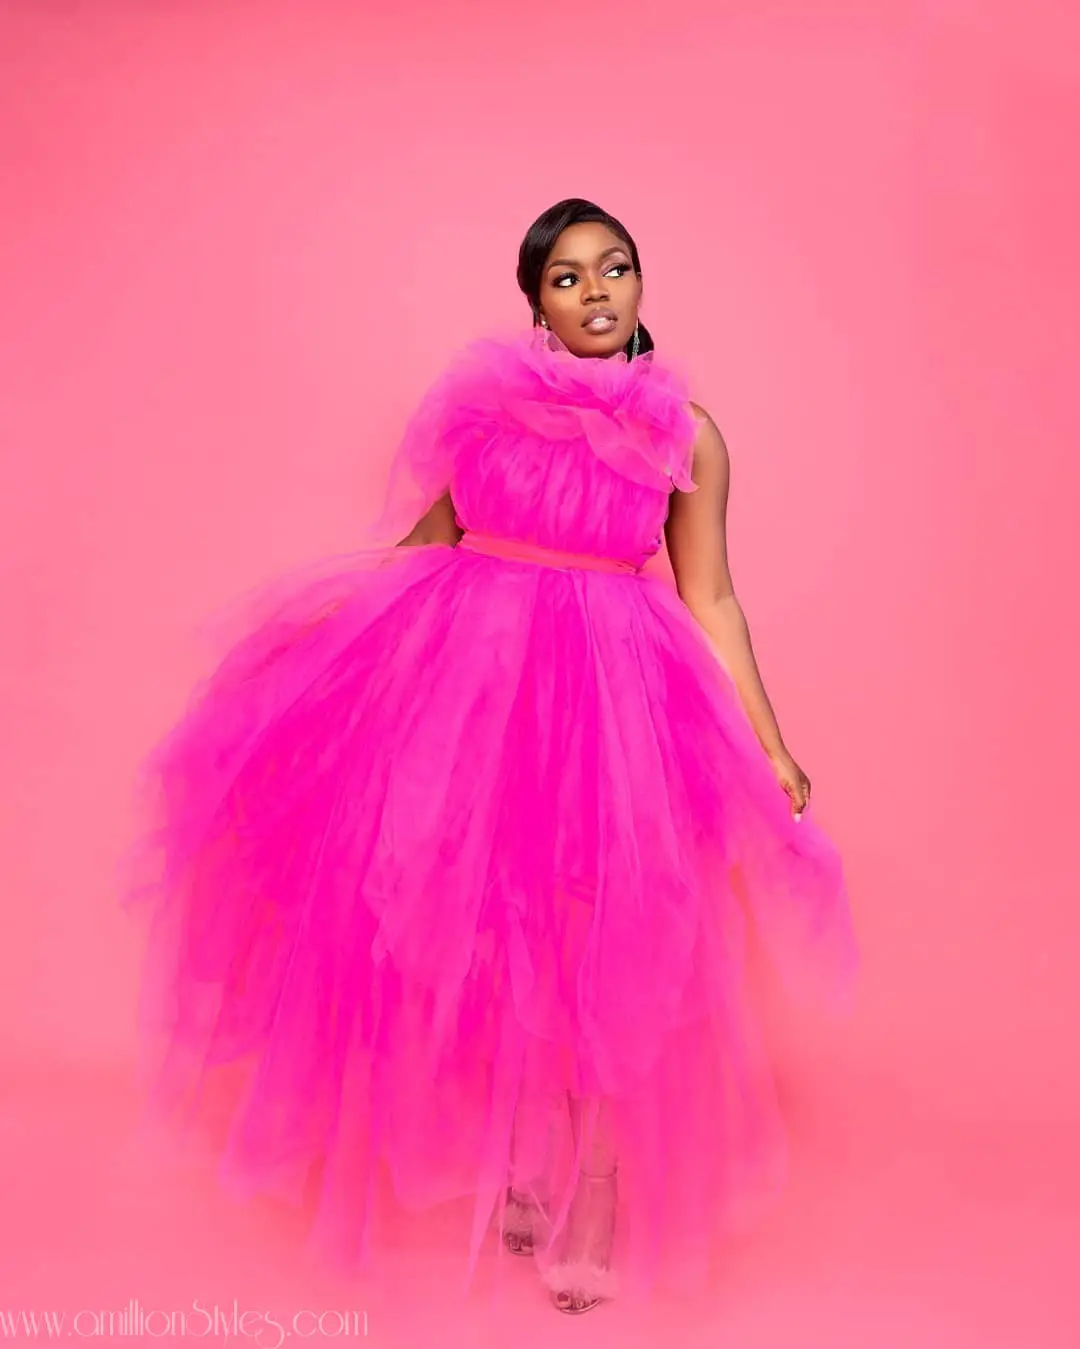 See The Cast Of Sugar Rush In An Amazing Photoshoot